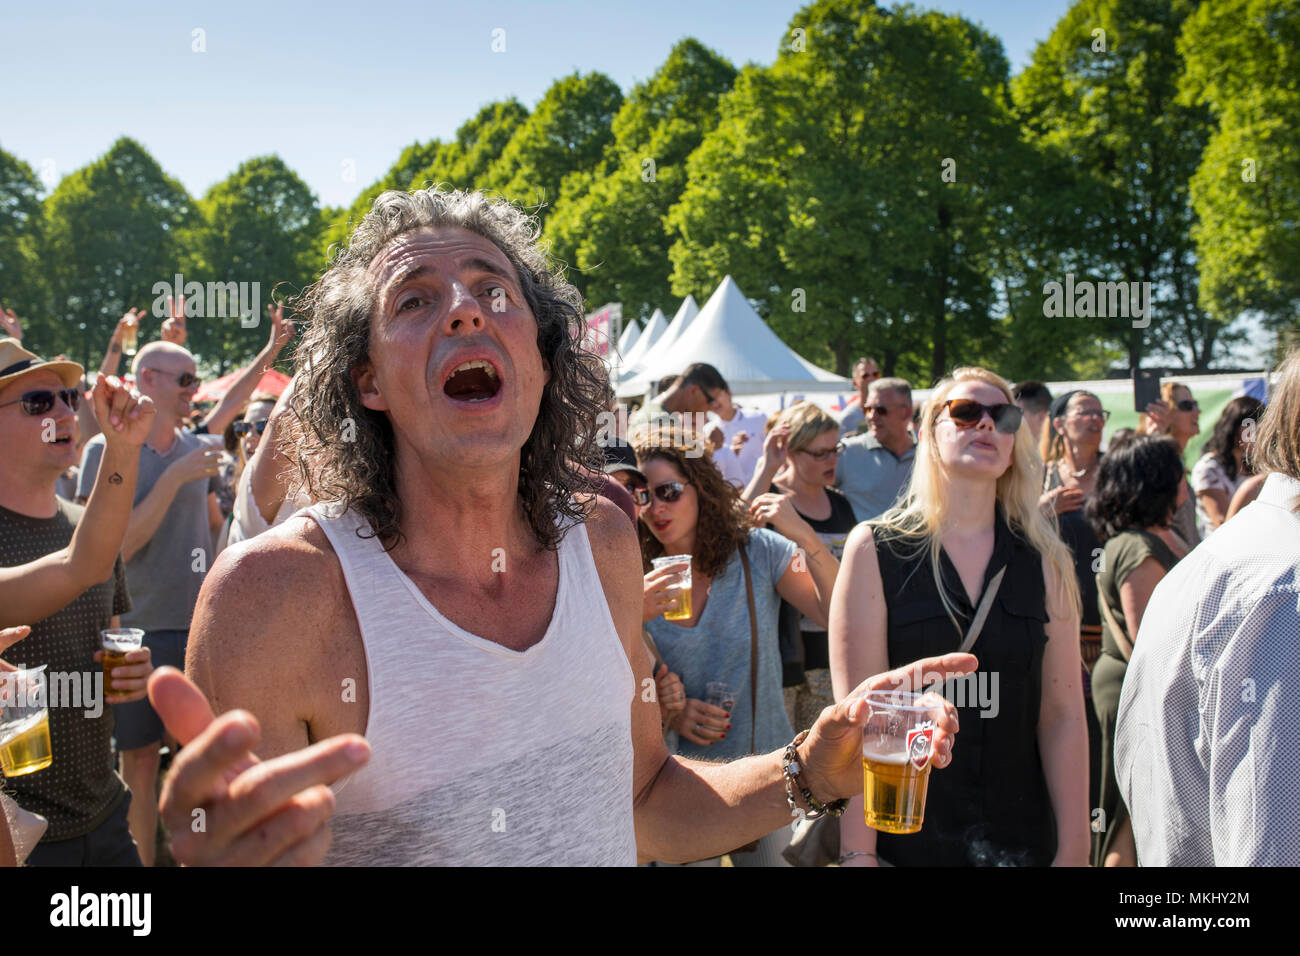 Middle ages man with long hair intensely enjoying music at liberation feast in the Netherlands Stock Photo